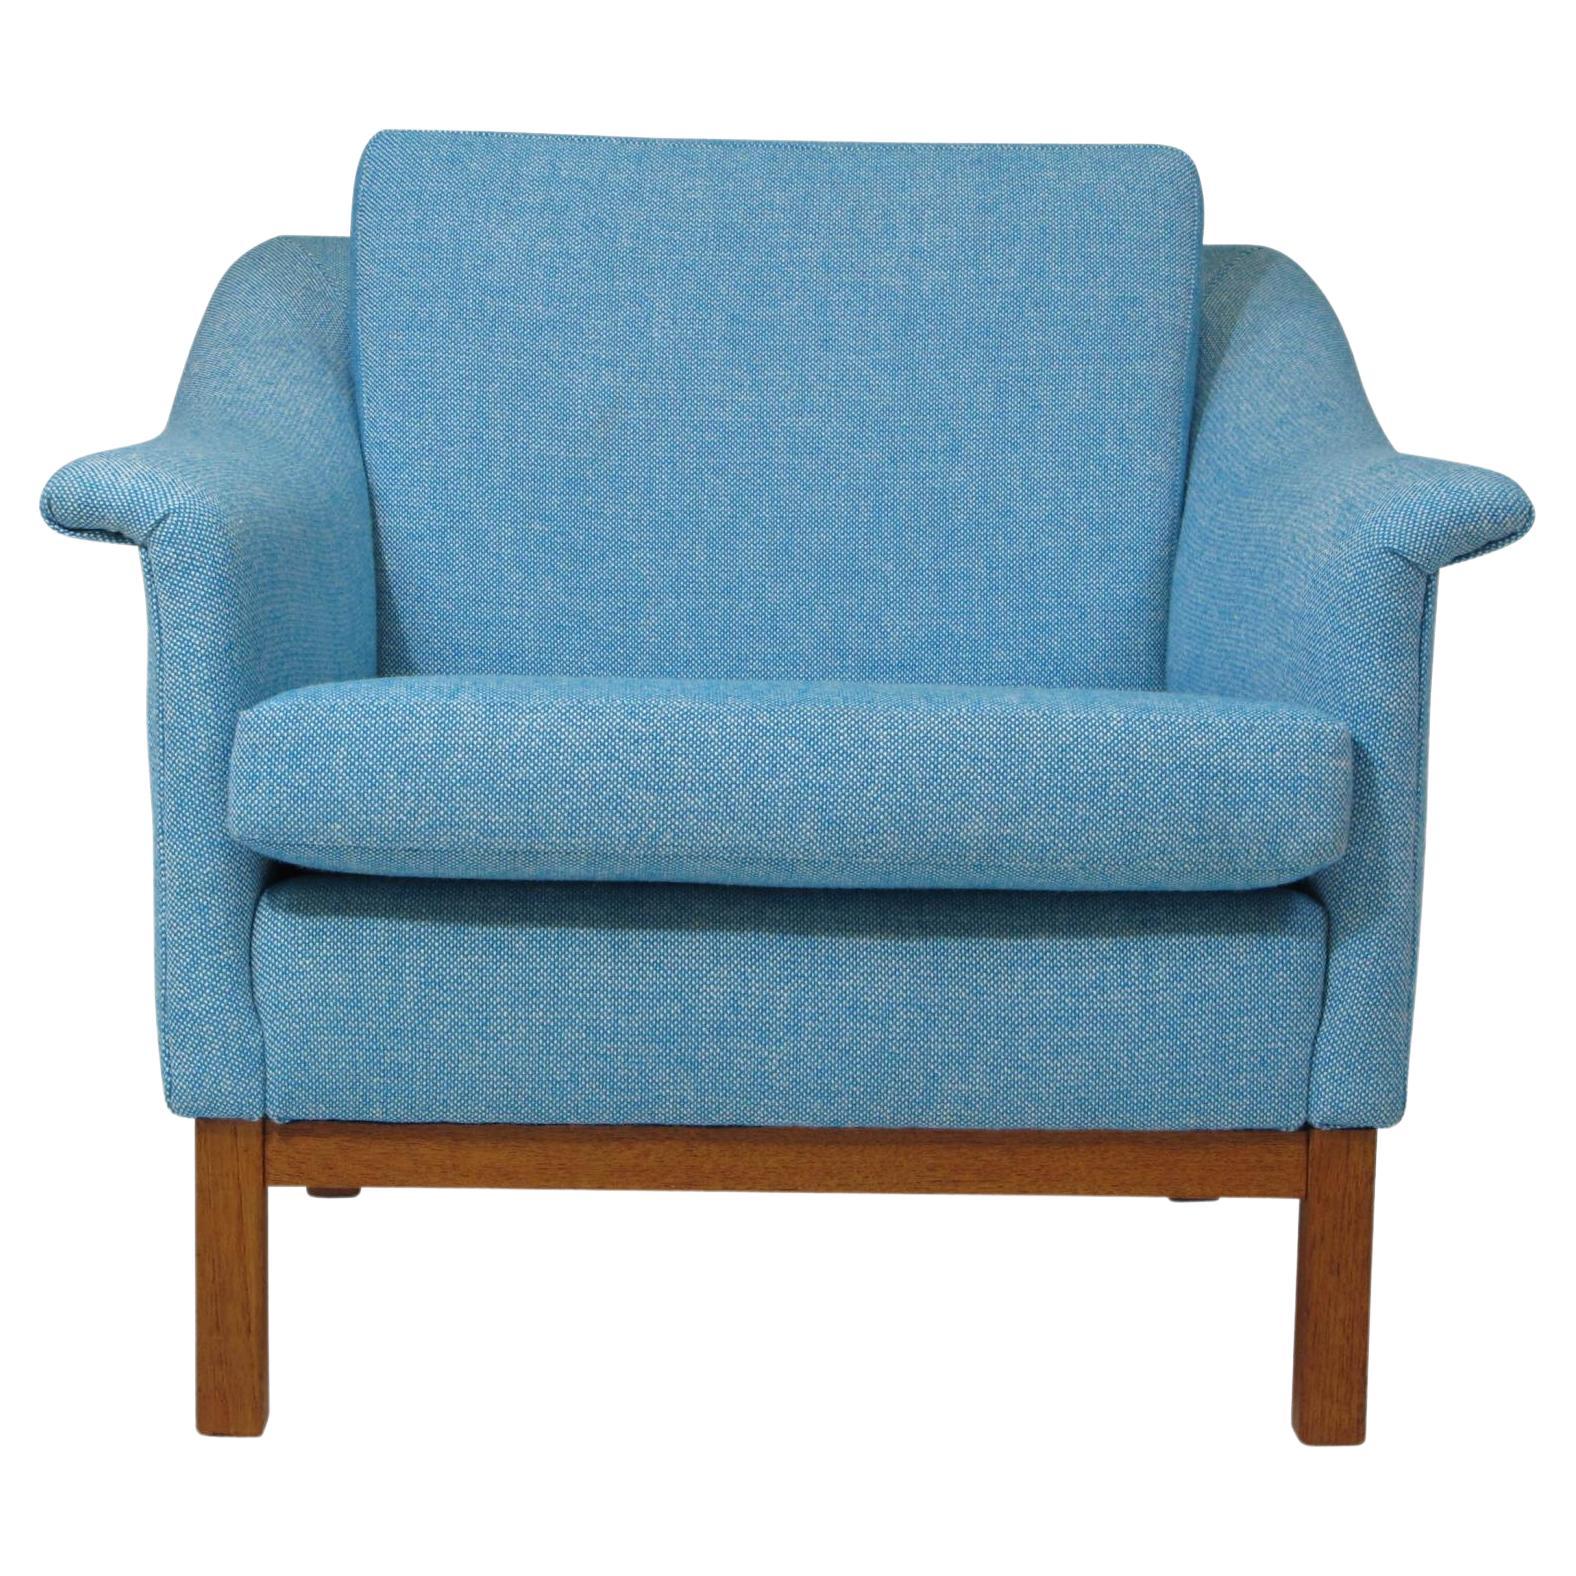 Mid century lounge chair designed by Folke Ohlsson for Dux. Solid wood frame newly upholstered in woven light blue & white Nanna Ditzel wool textile. 
 